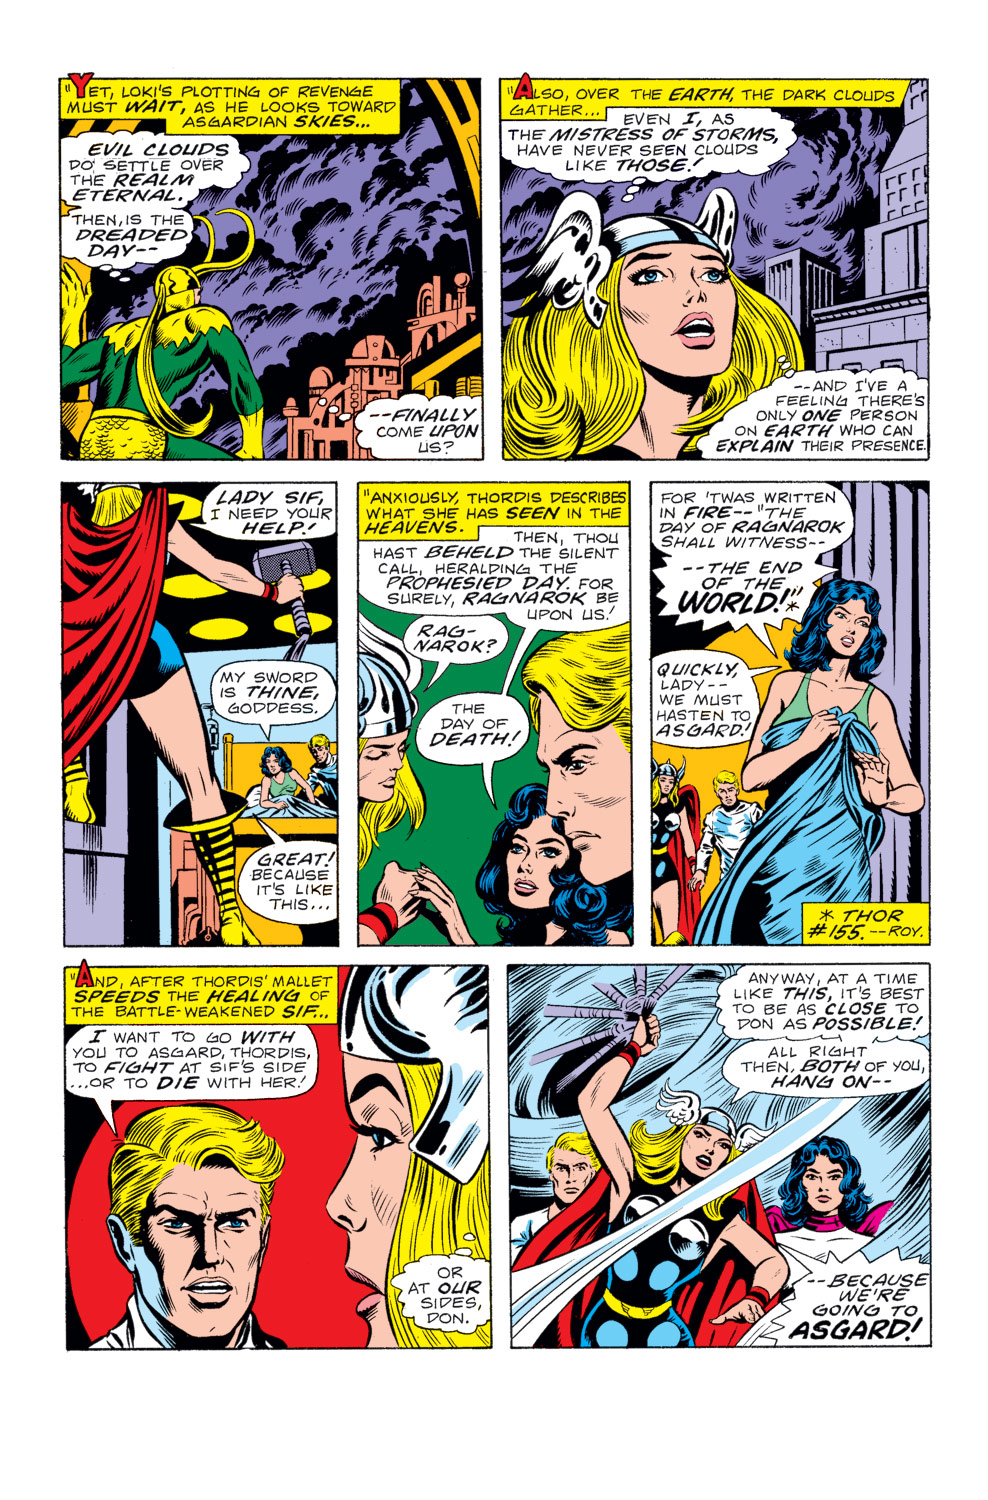 What If? (1977) issue 10 - Jane Foster had found the hammer of Thor - Page 28